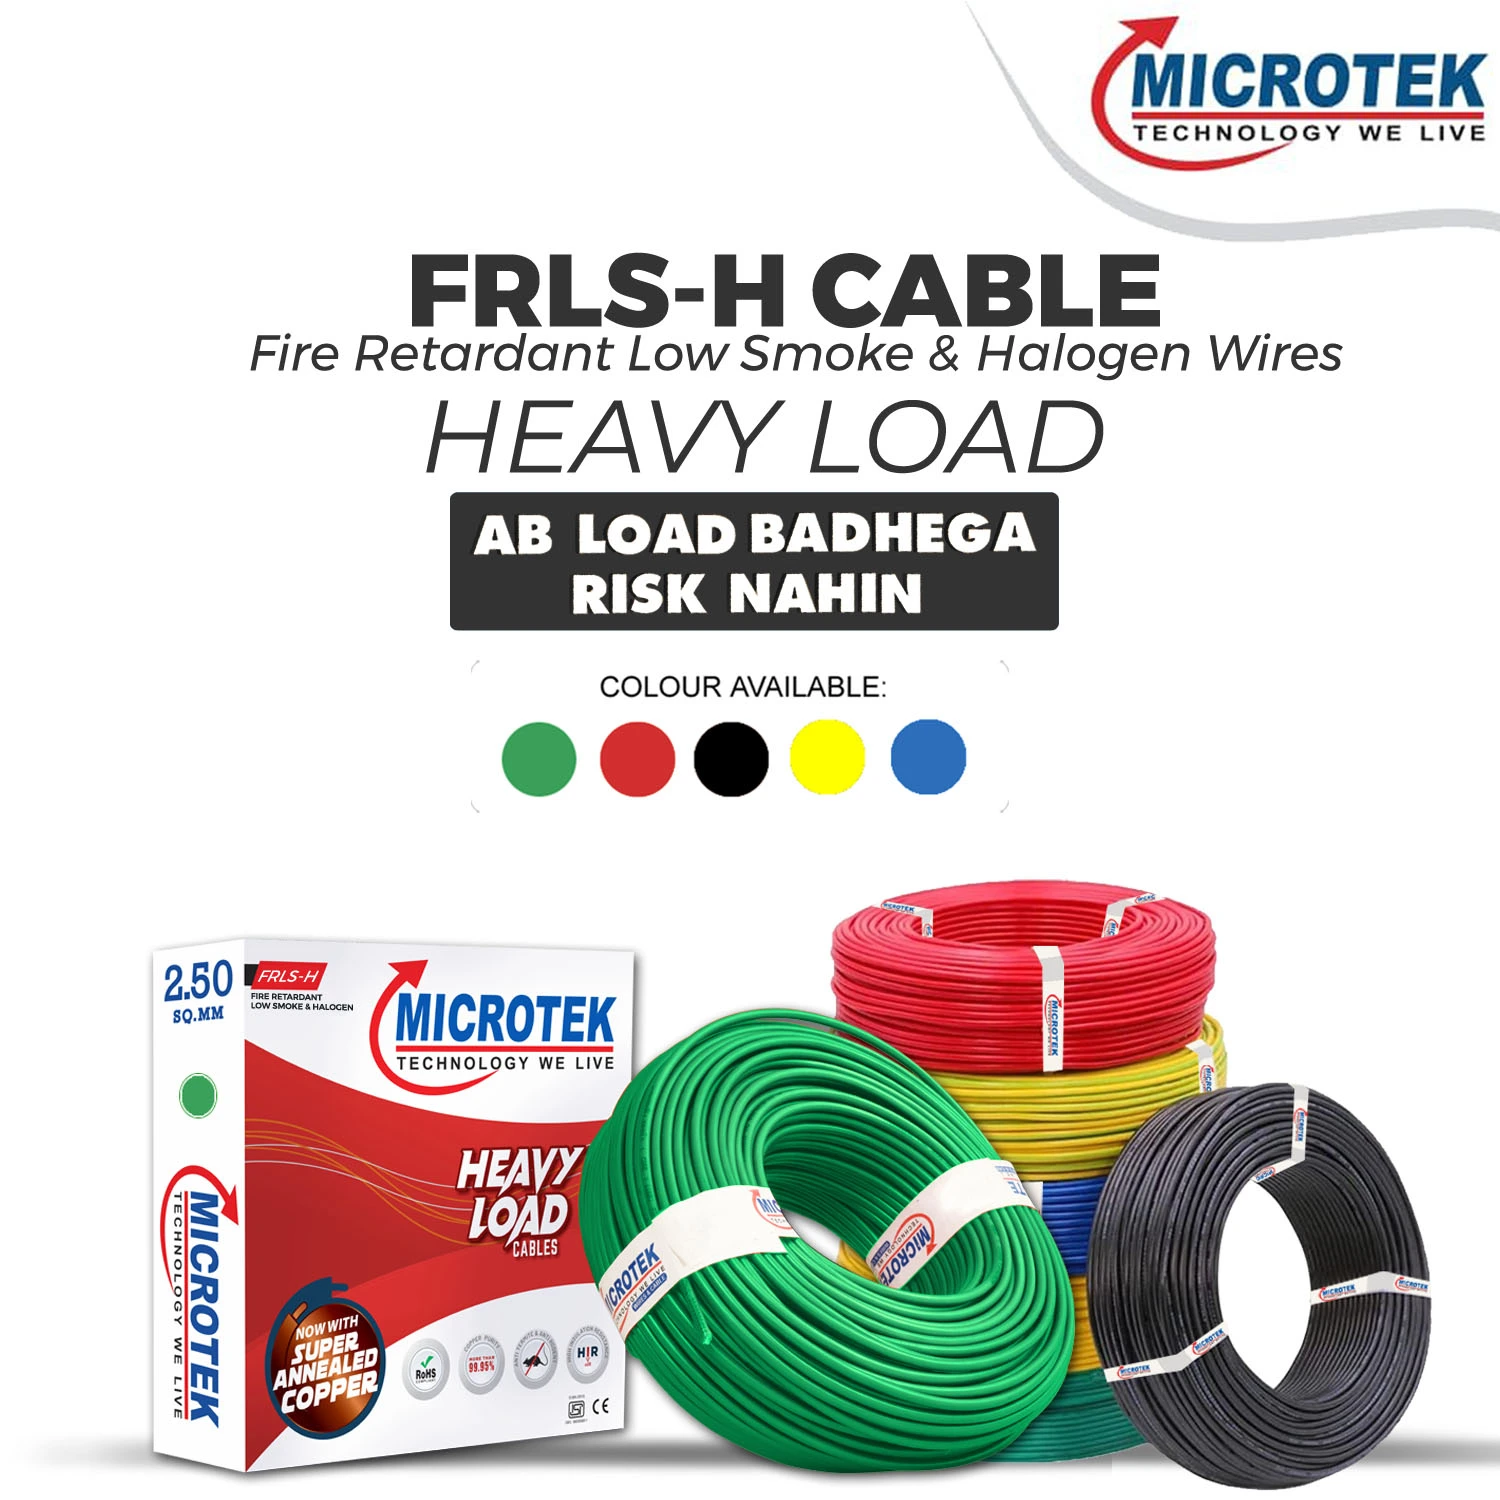 FRLS-H (FIRE RETARDANT LOW SMOKE & HALOGEN WIRES) PVC FLEXIBLE WIRE & CABLE